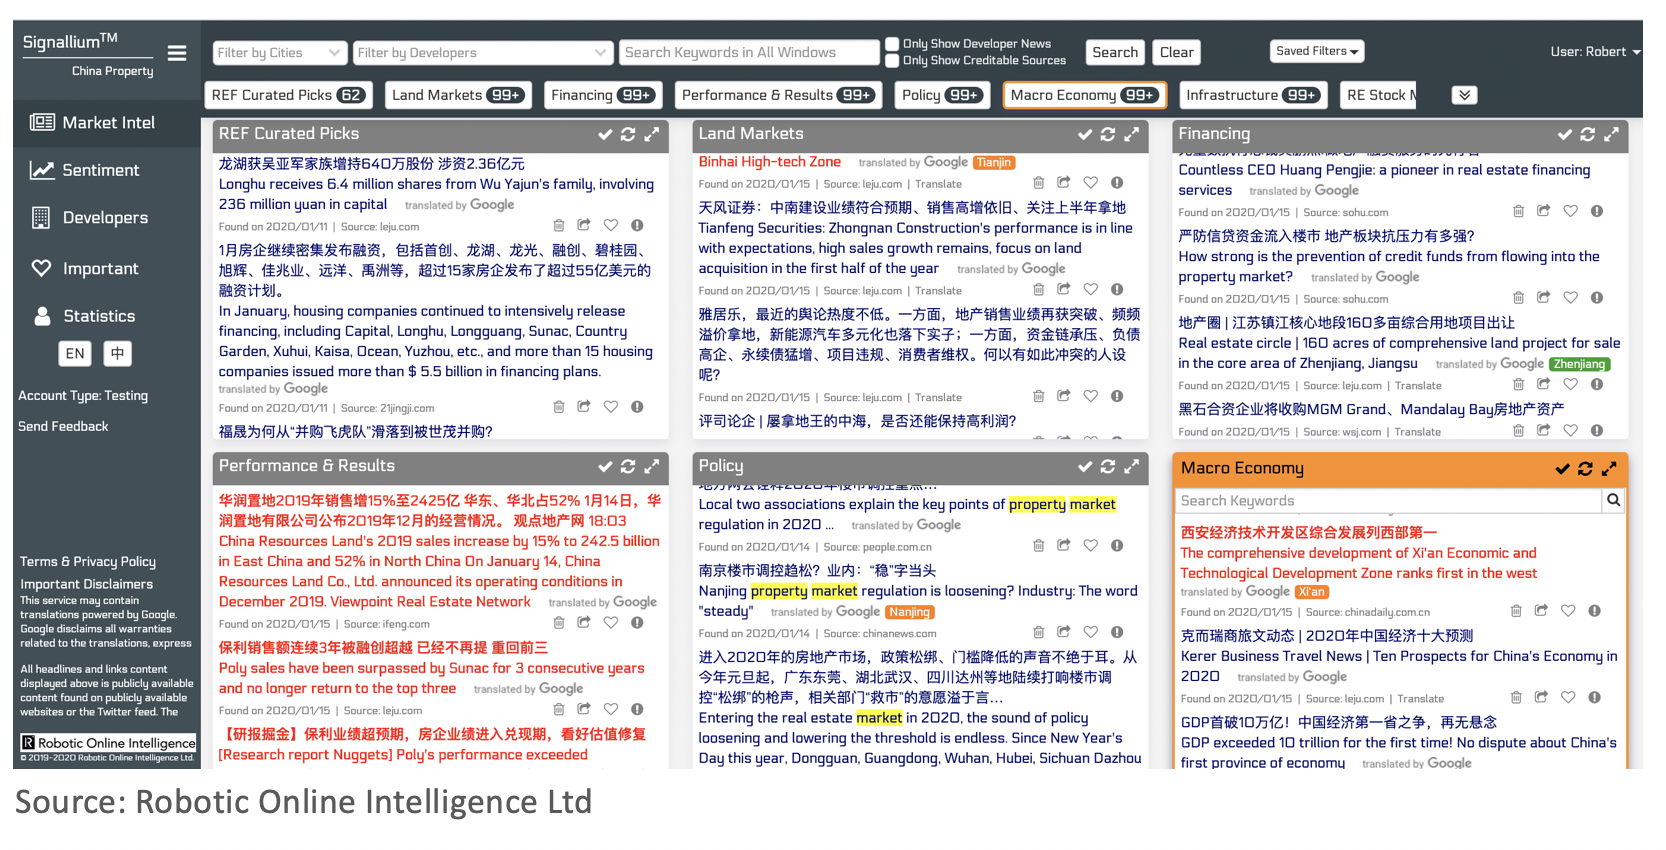 Robotic Online Intelligence Ltd, Wednesday, January 15, 2020, Press release picture